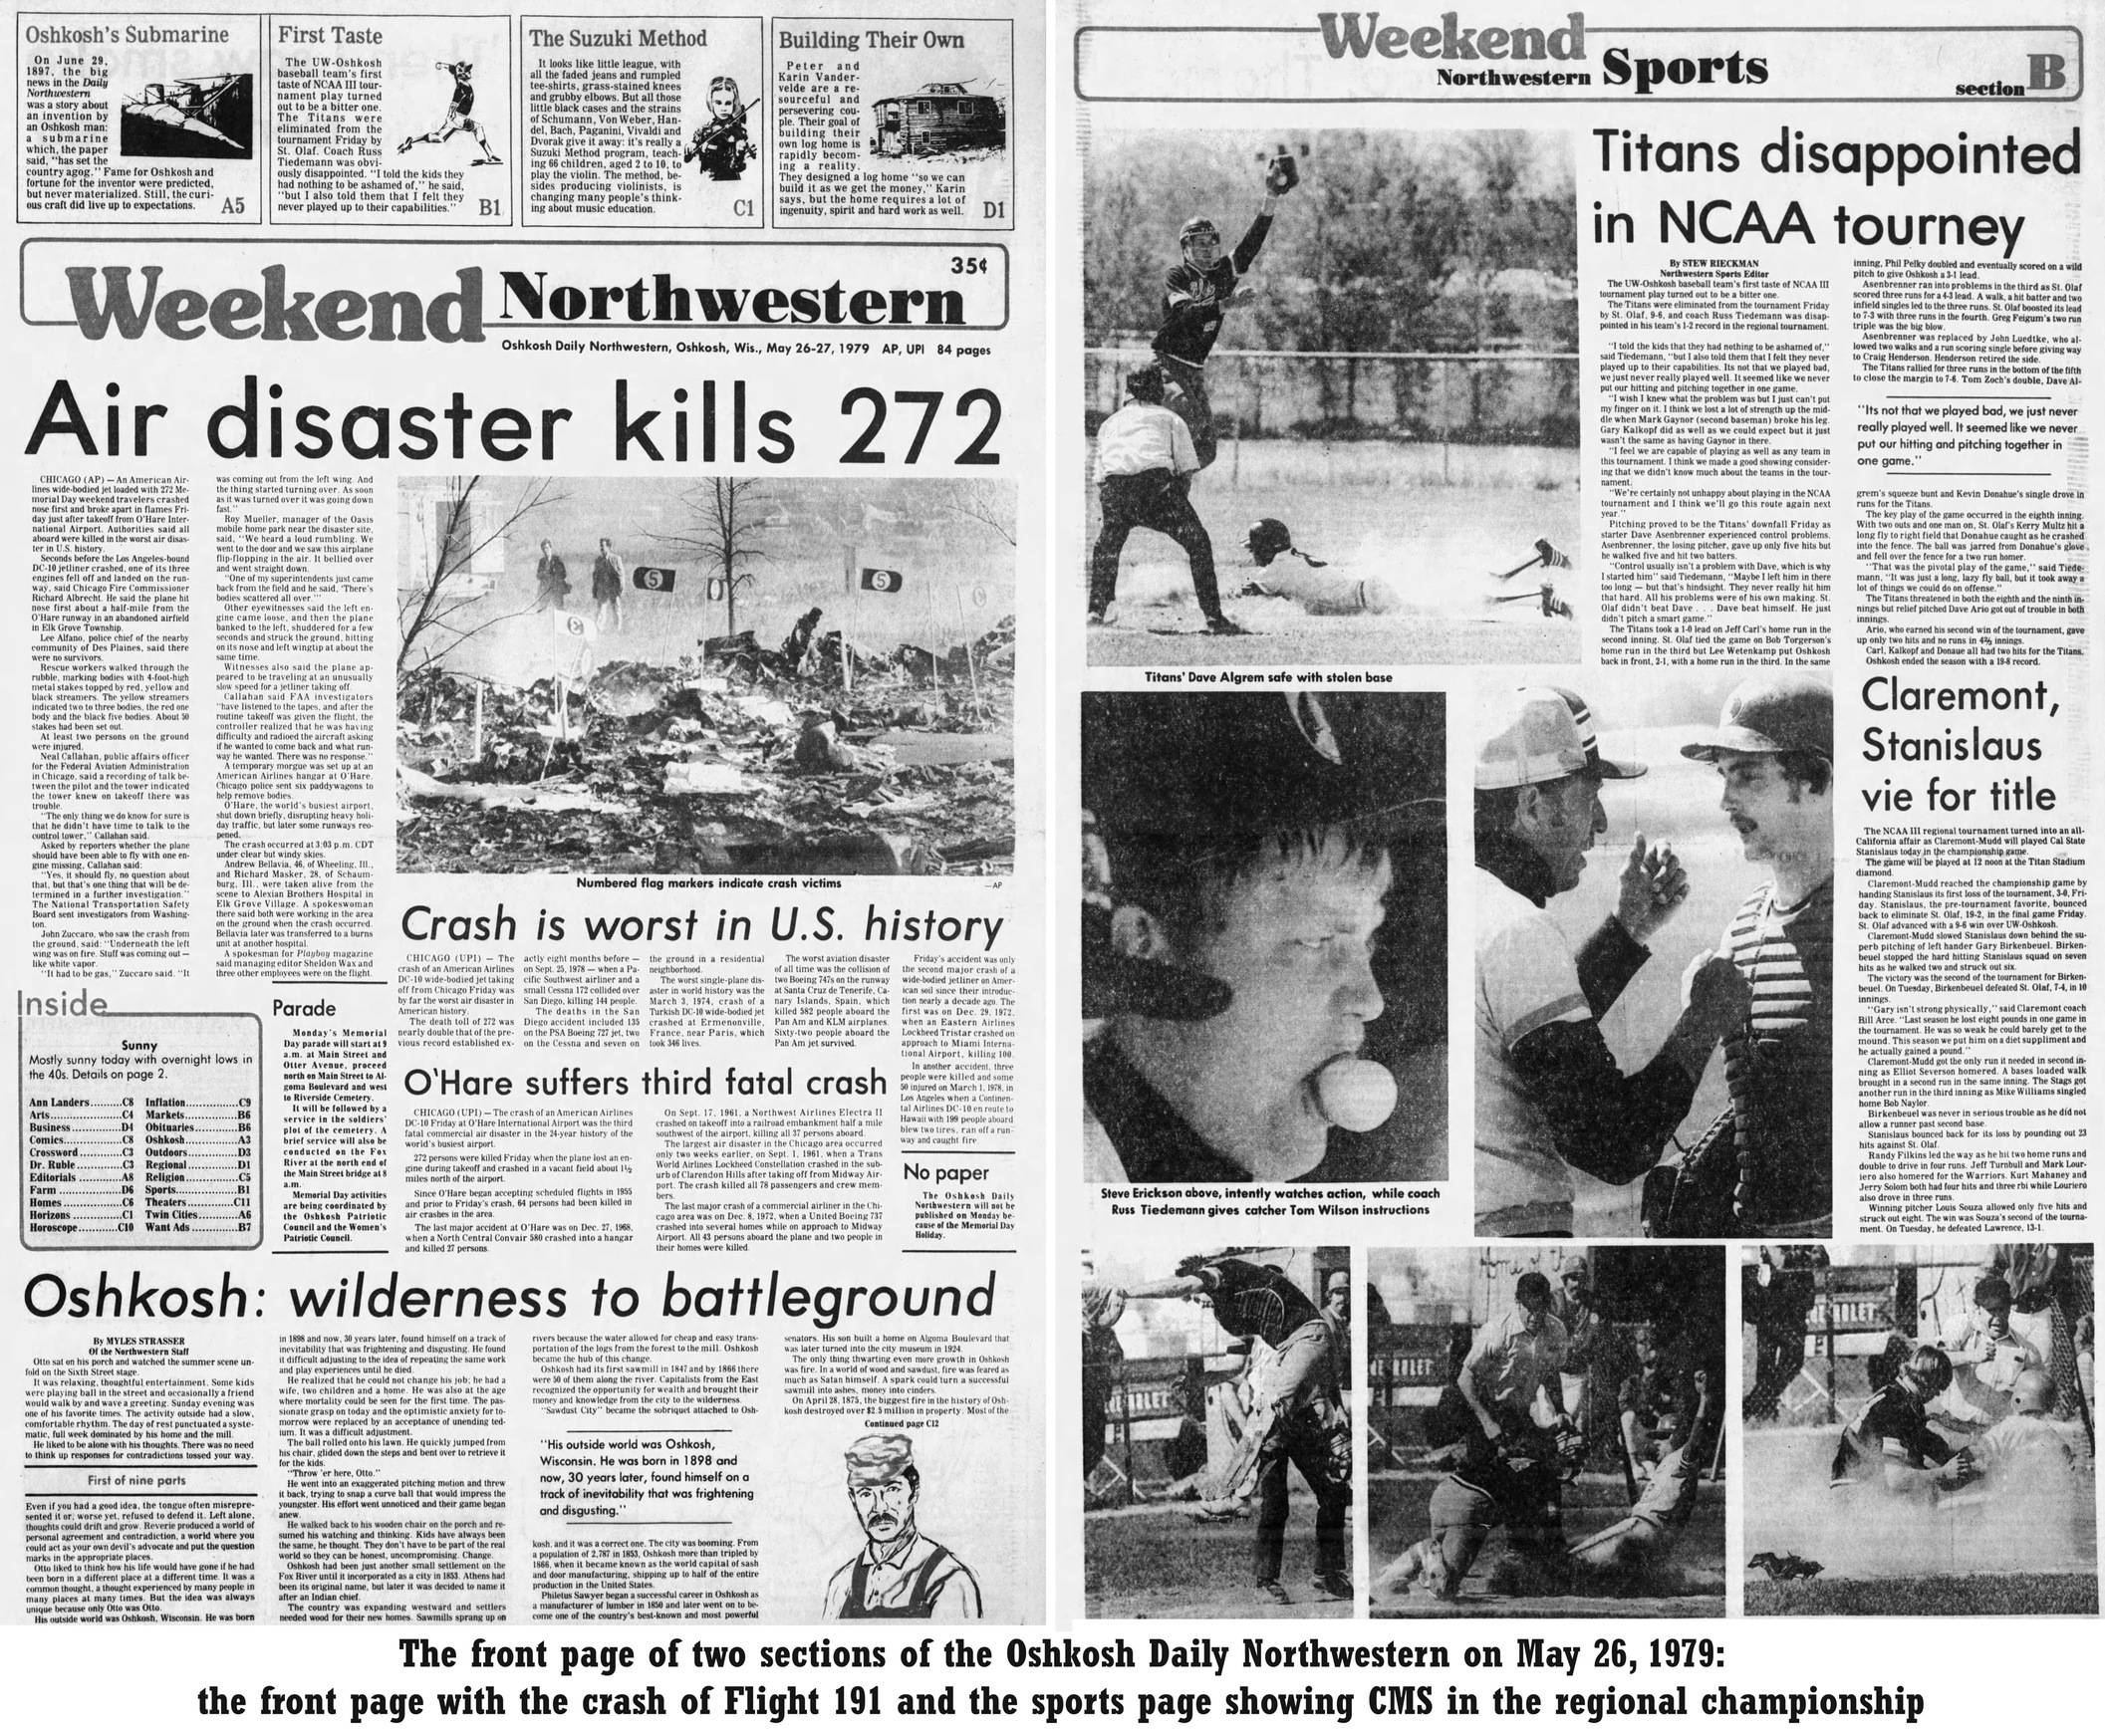 The front page of two sections of the Daily Northwestern Newspaper in Oshkosh. Page A1 shows the Flight 191 crash. Page B1 (Sports) shoes a headline: Claremont, Stanislaus Vie for Title. Newspaper is for decorative purposes.